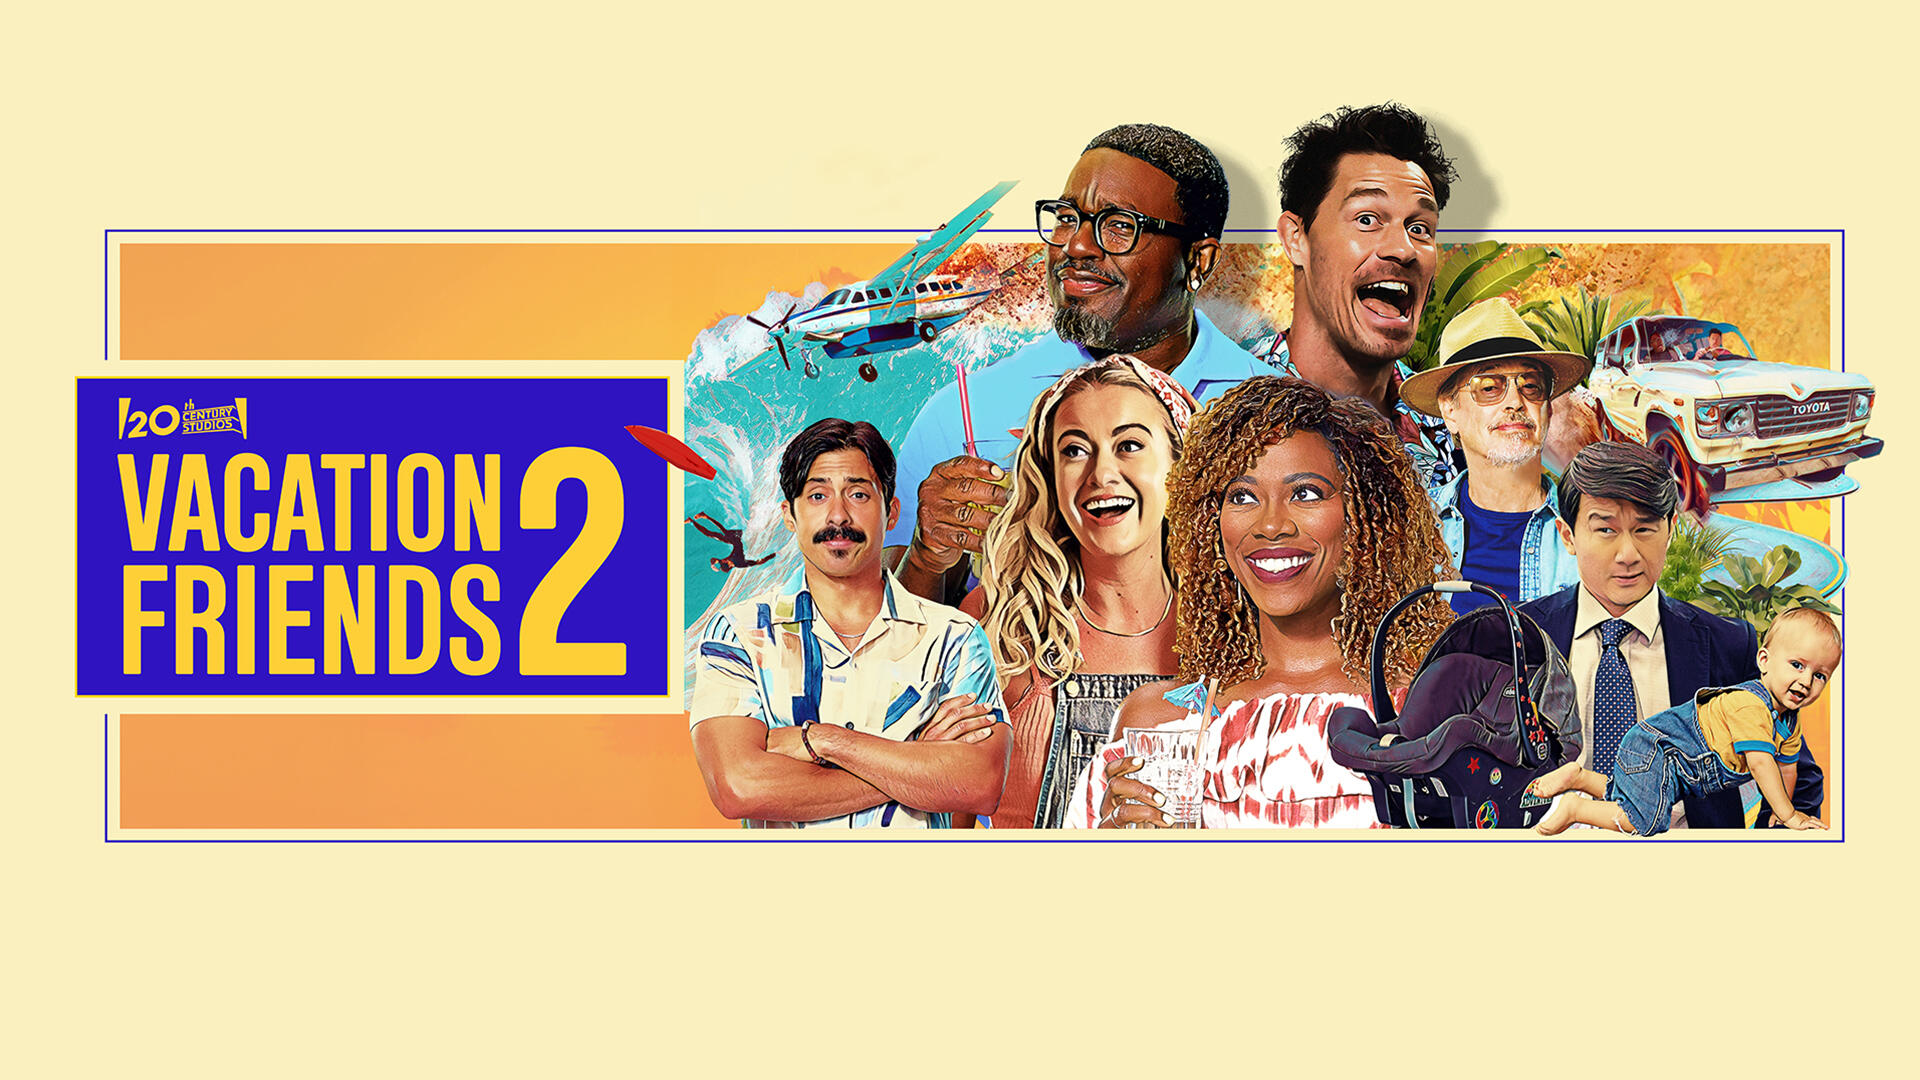 Vacation Friends 2 Cast - Every Actor and Character in the 2023 Hulu Movie